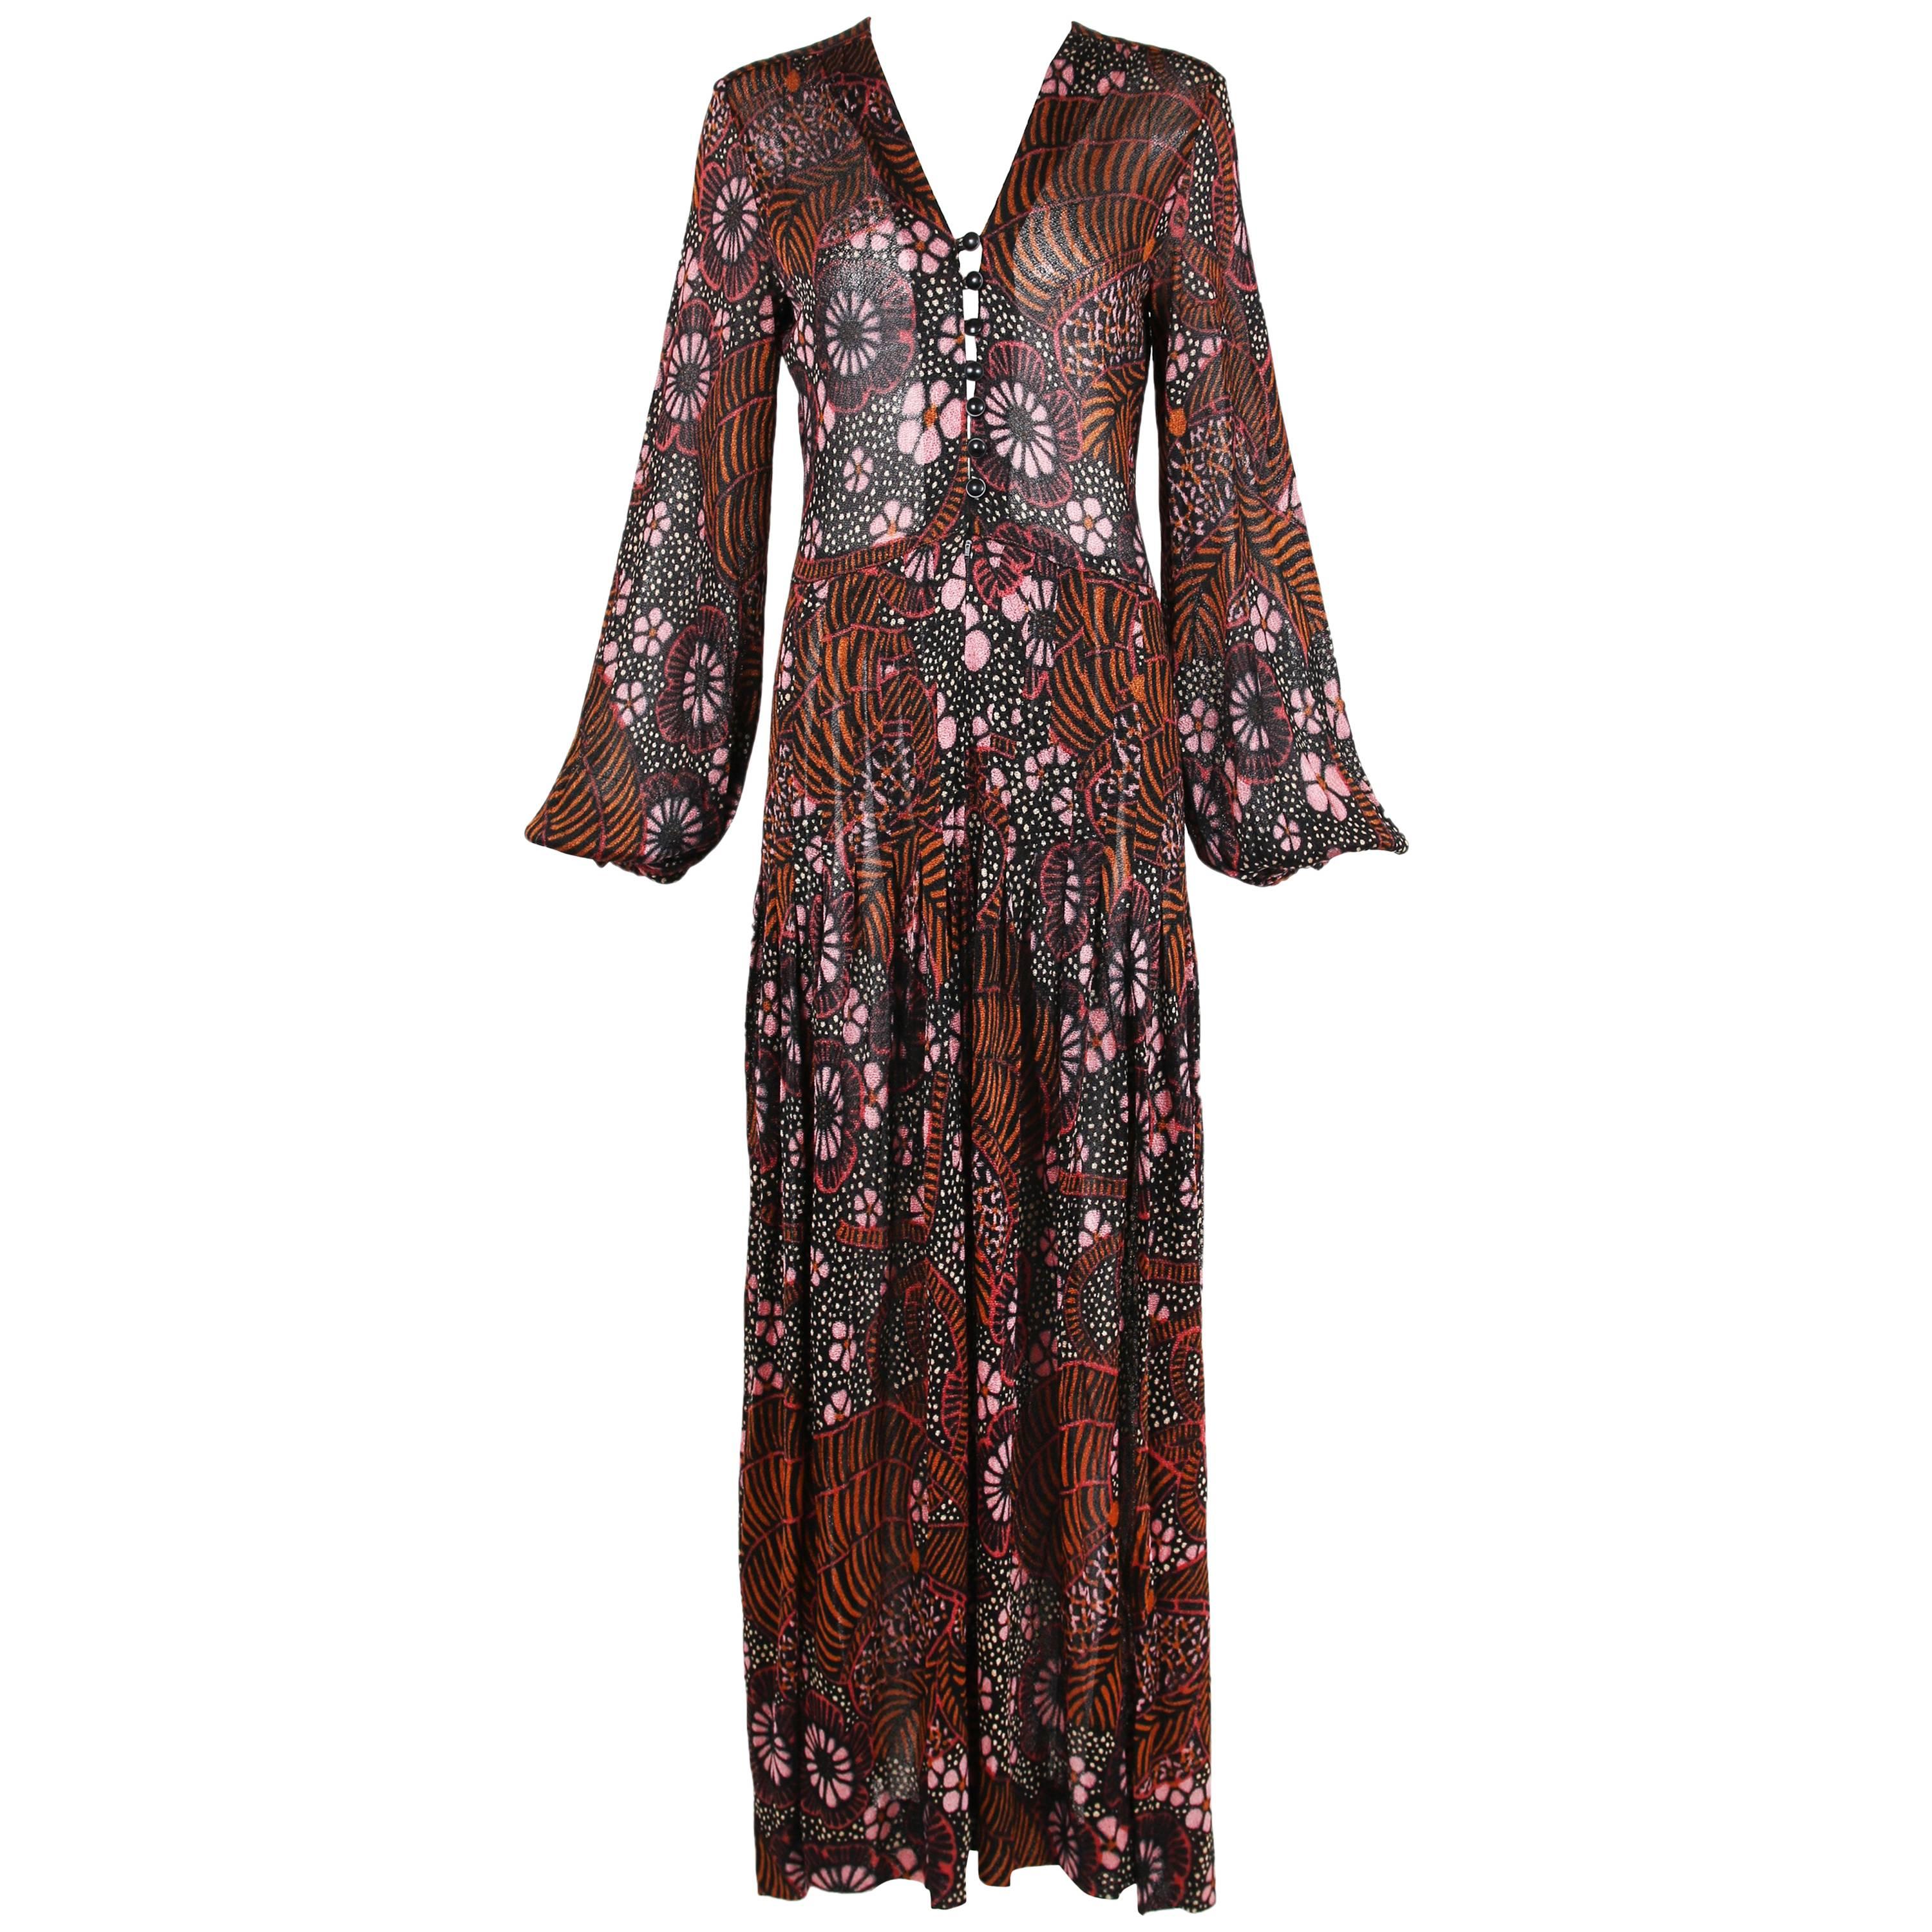 Rare 1970's Yves Saint Laurent Floral Printed Crocheted Maxi Dress at ...